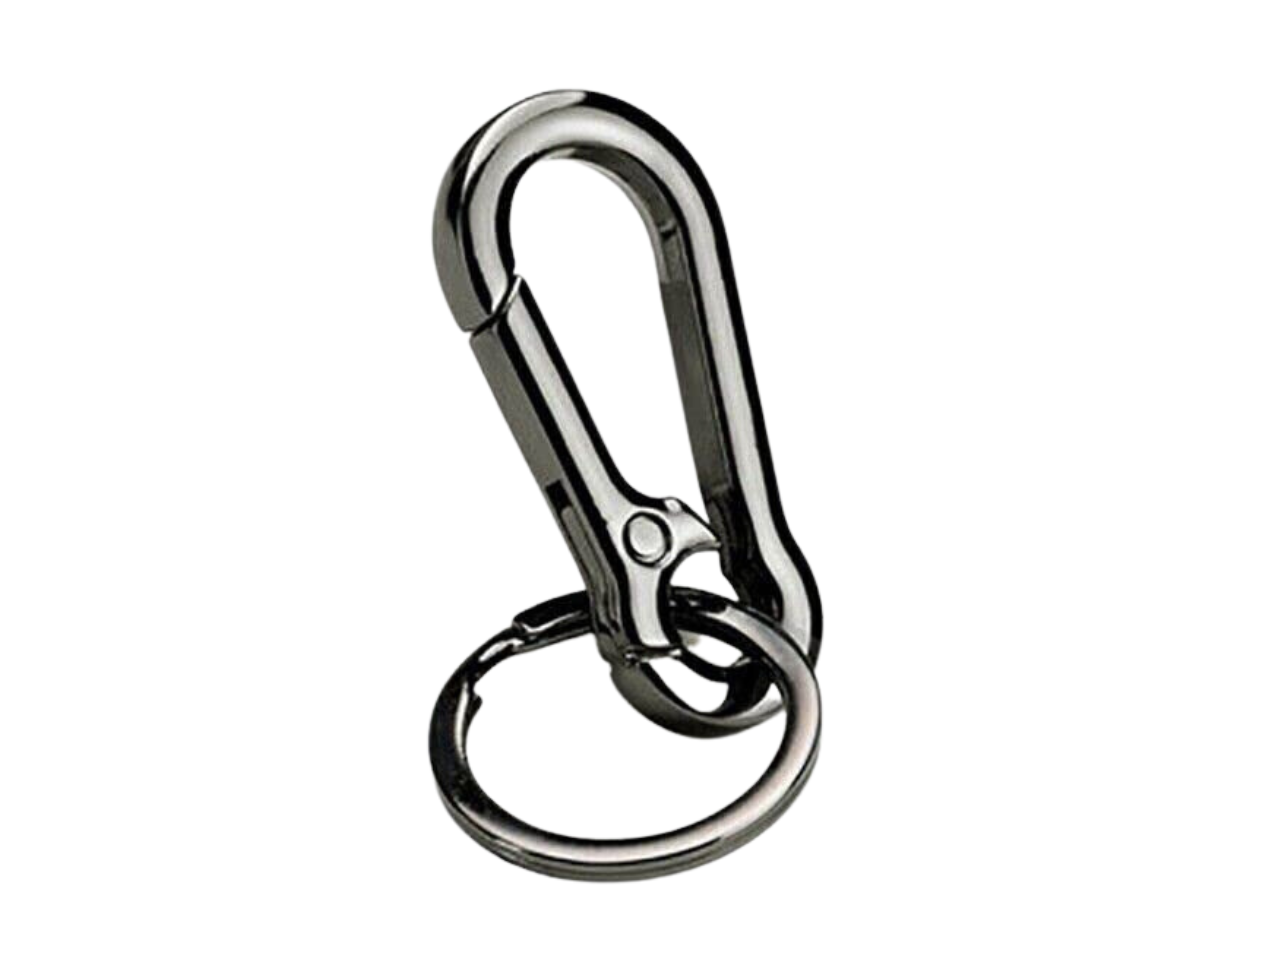 Stainless Steel Quick Release Detachable Keychain Key Ring Belt Clip Holder